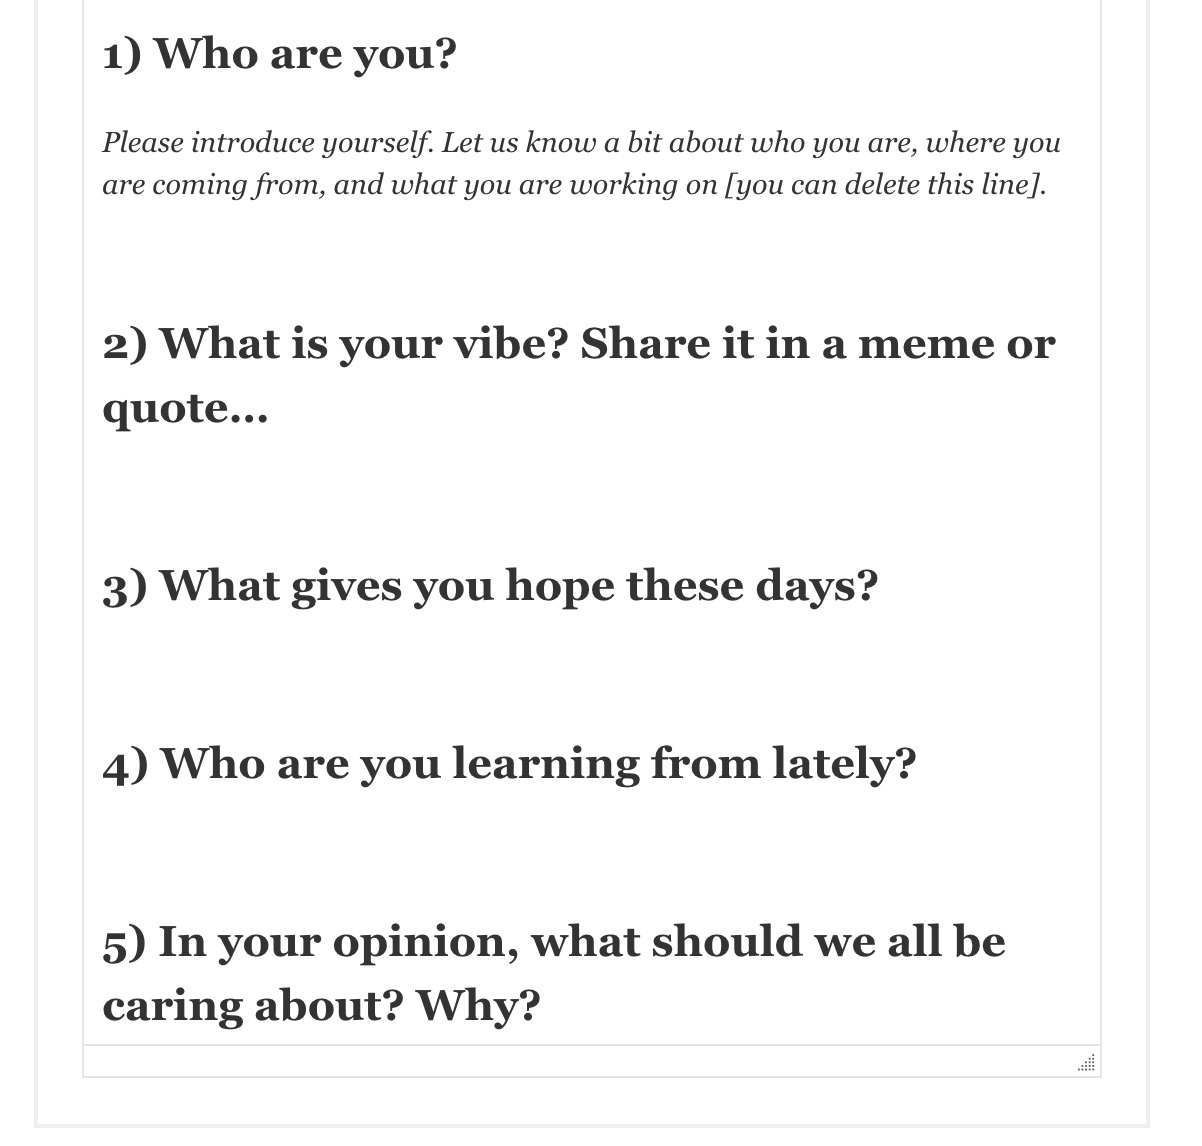 Questions preset into the form include ones like "Who are you?", "What is your vibe, share in a meme or a quote", "What gives you hope these days?", "Who are you learning from lately", and more